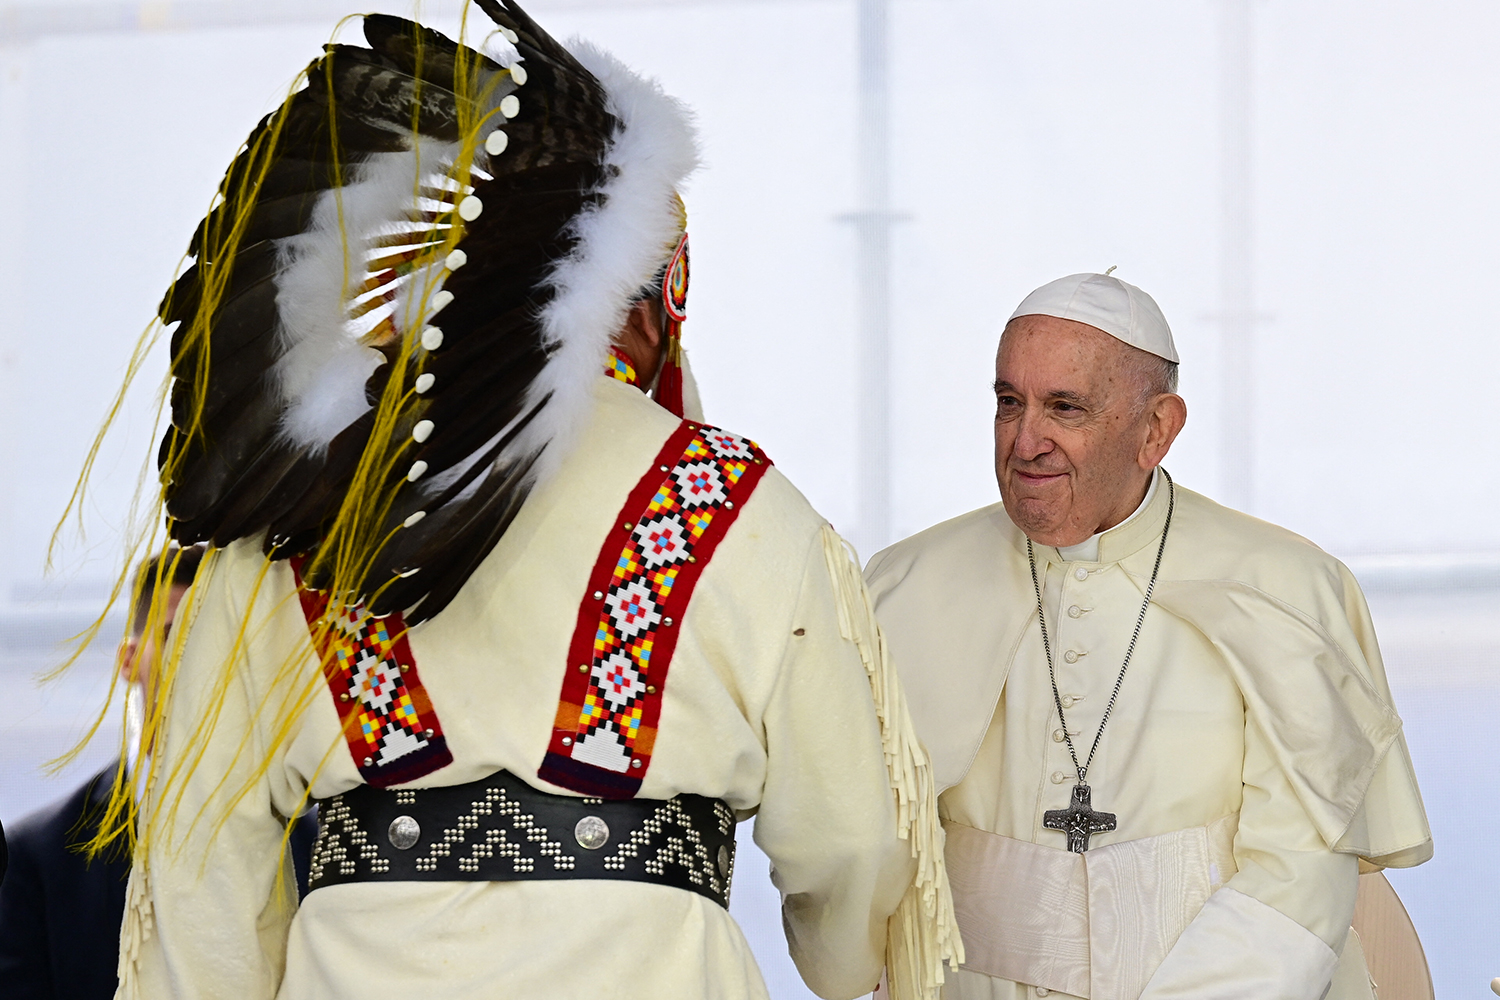 pope visits canada to apologize